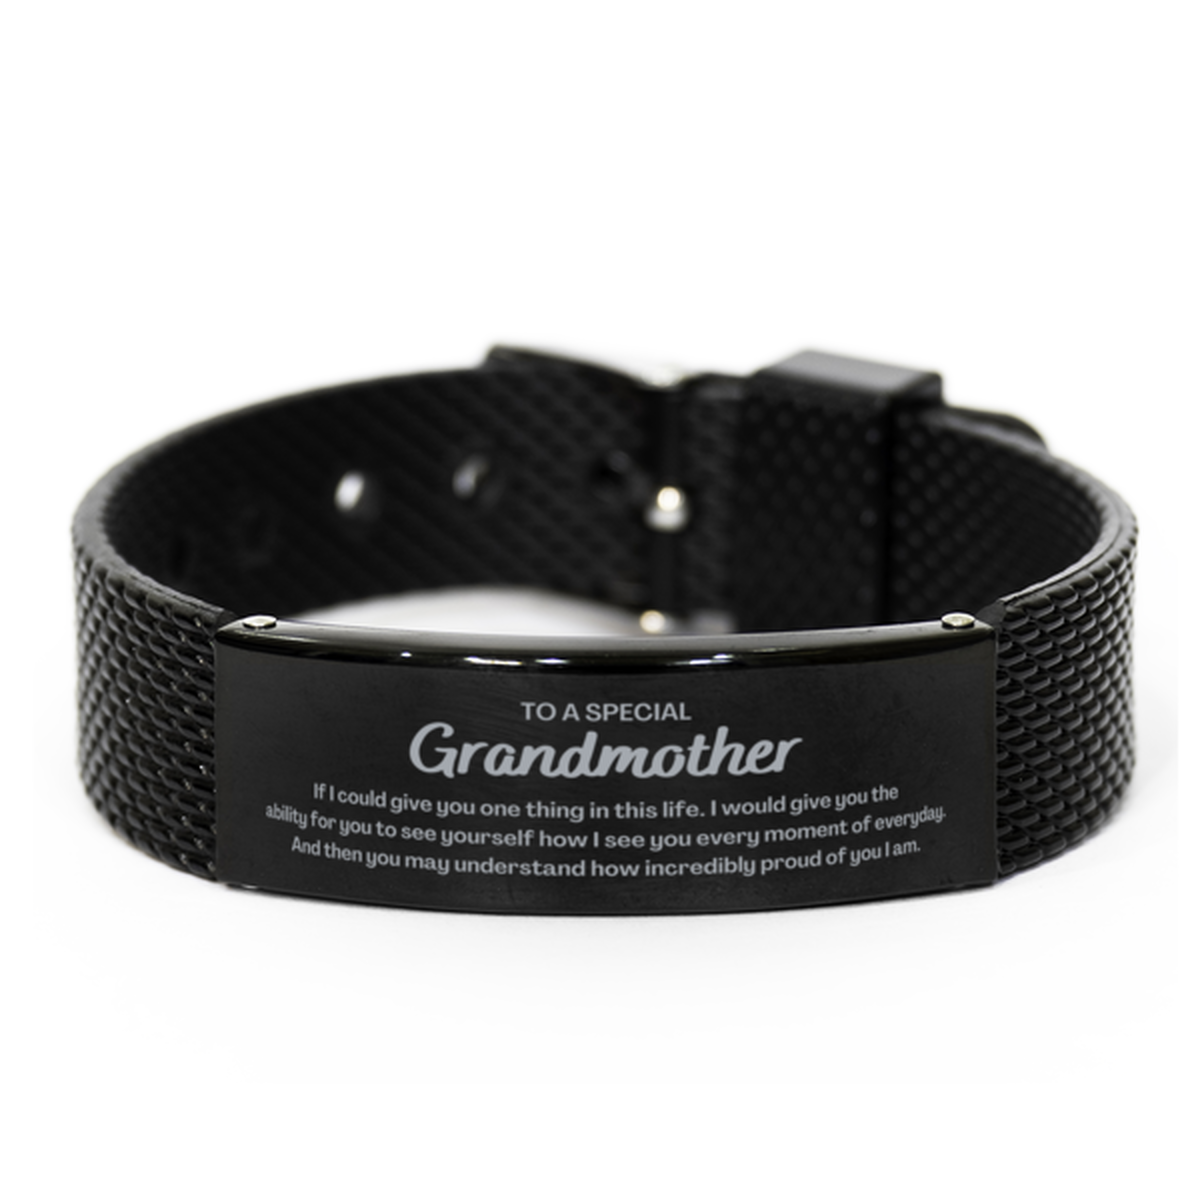 To My Grandmother Black Shark Mesh Bracelet, Gifts For Grandmother Engraved, Inspirational Gifts for Christmas Birthday, Epic Gifts for Grandmother To A Special Grandmother how incredibly proud of you I am